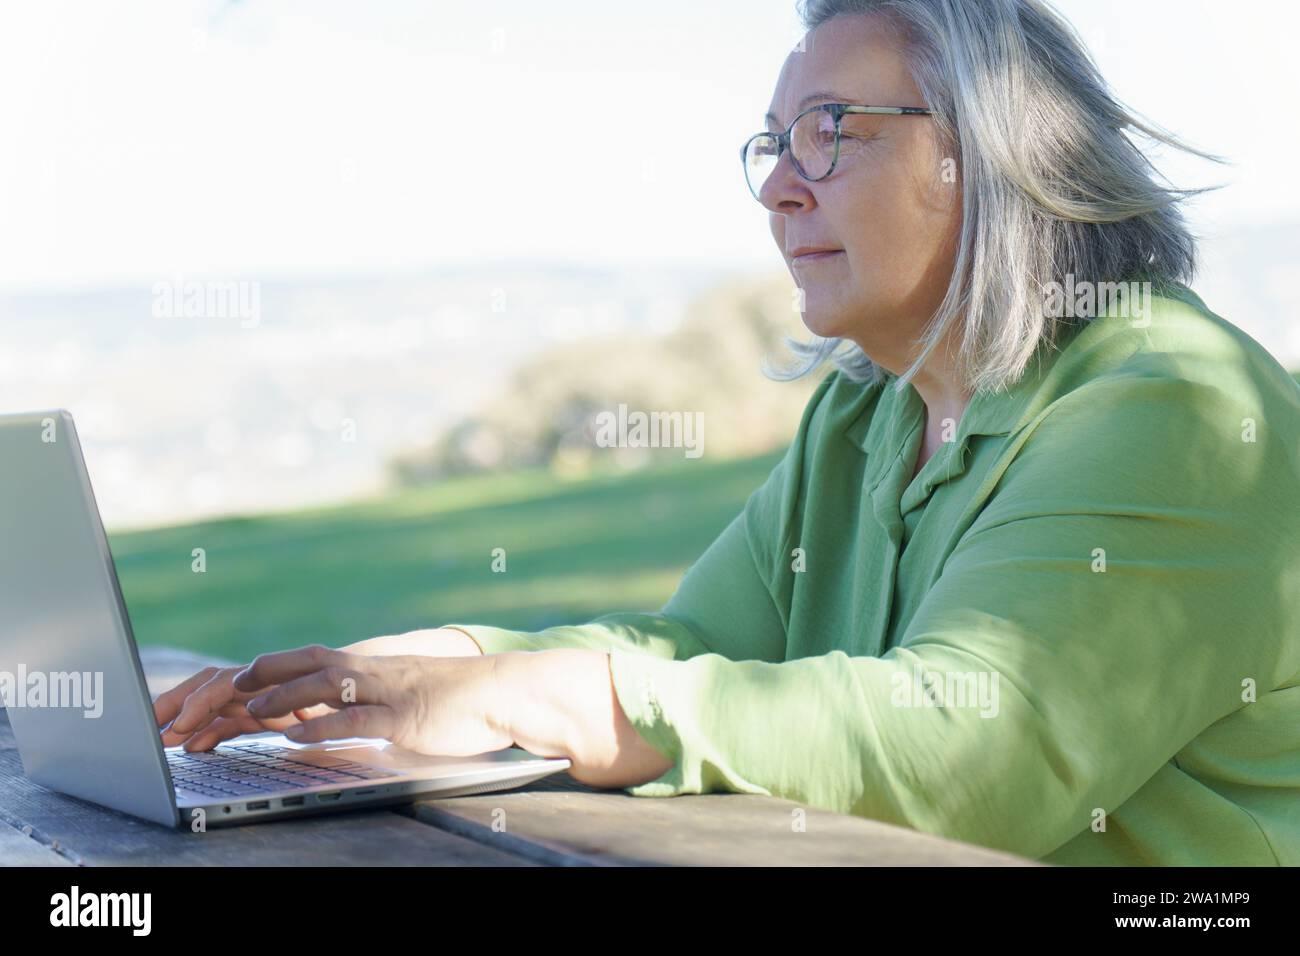 mature woman with white hair  smiling as she works at her computer Stock Photo